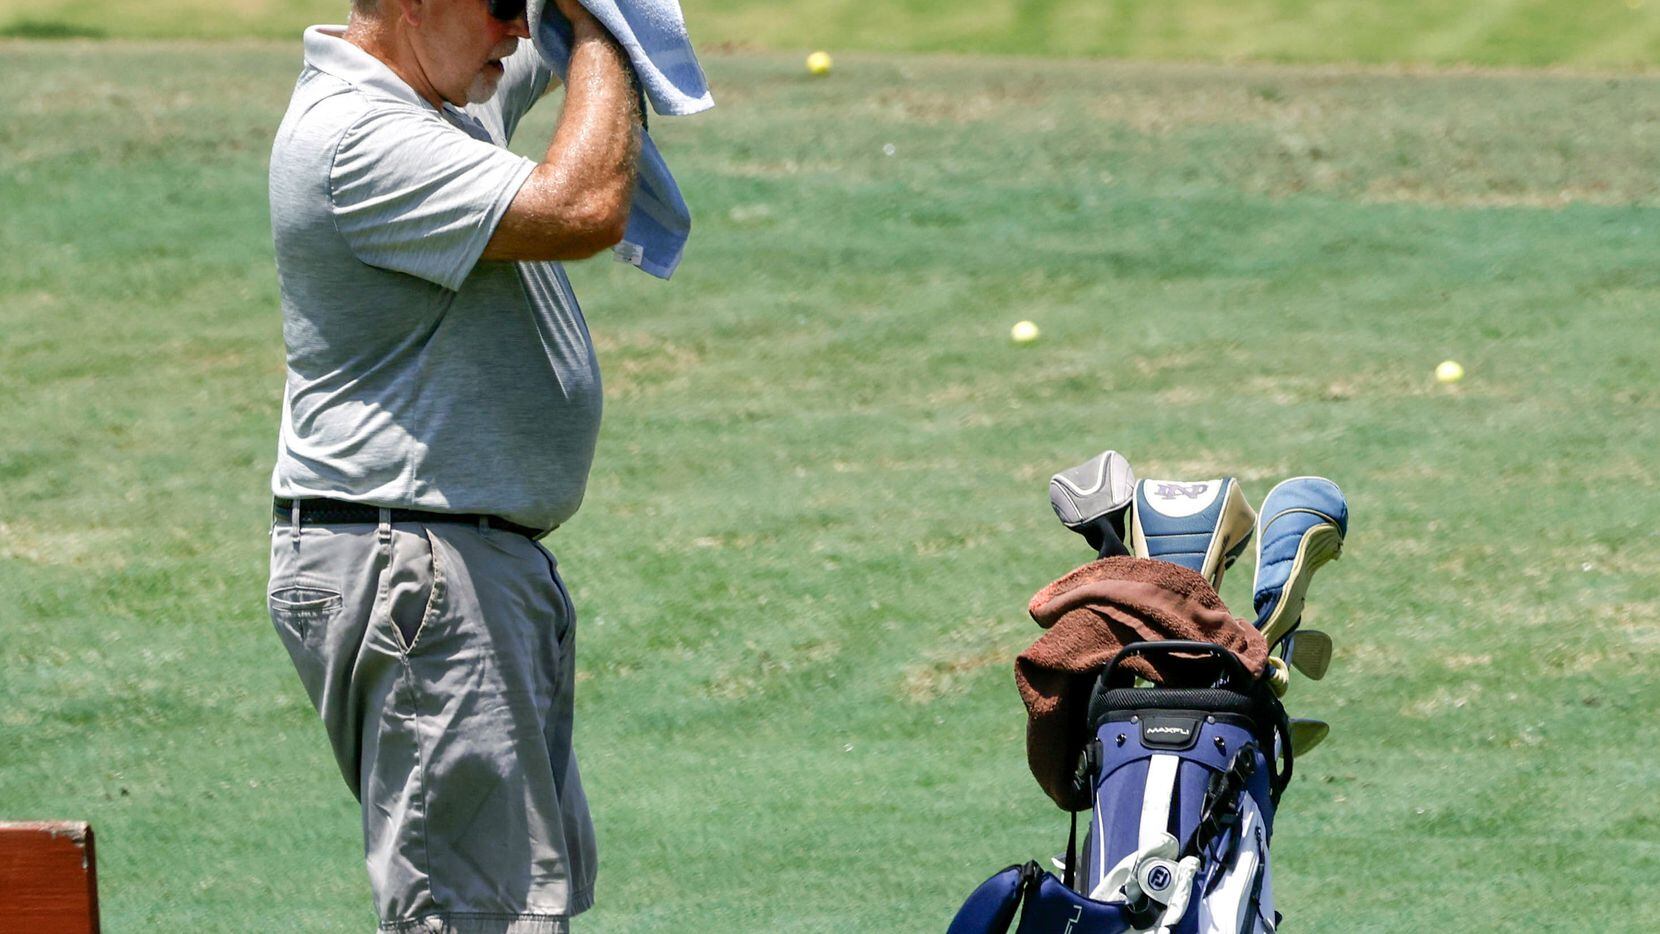 Larry McCrief uses a towel to wipe sweat from his face as he warms up for round of golf at...